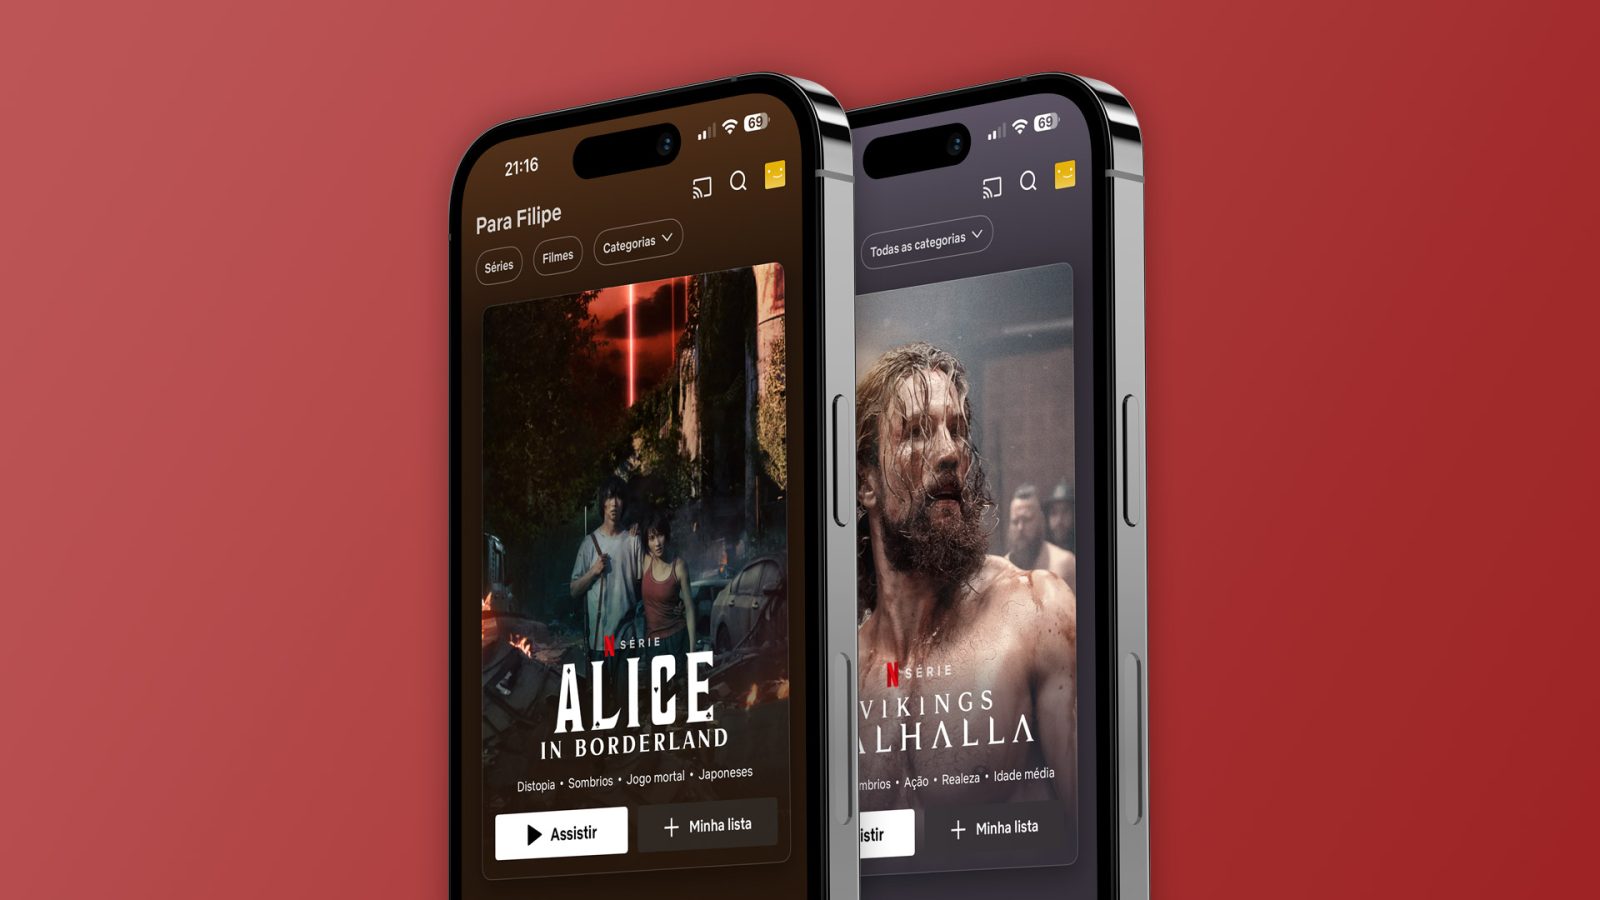 Netflix now rolling out refreshed interface to its iPhone app